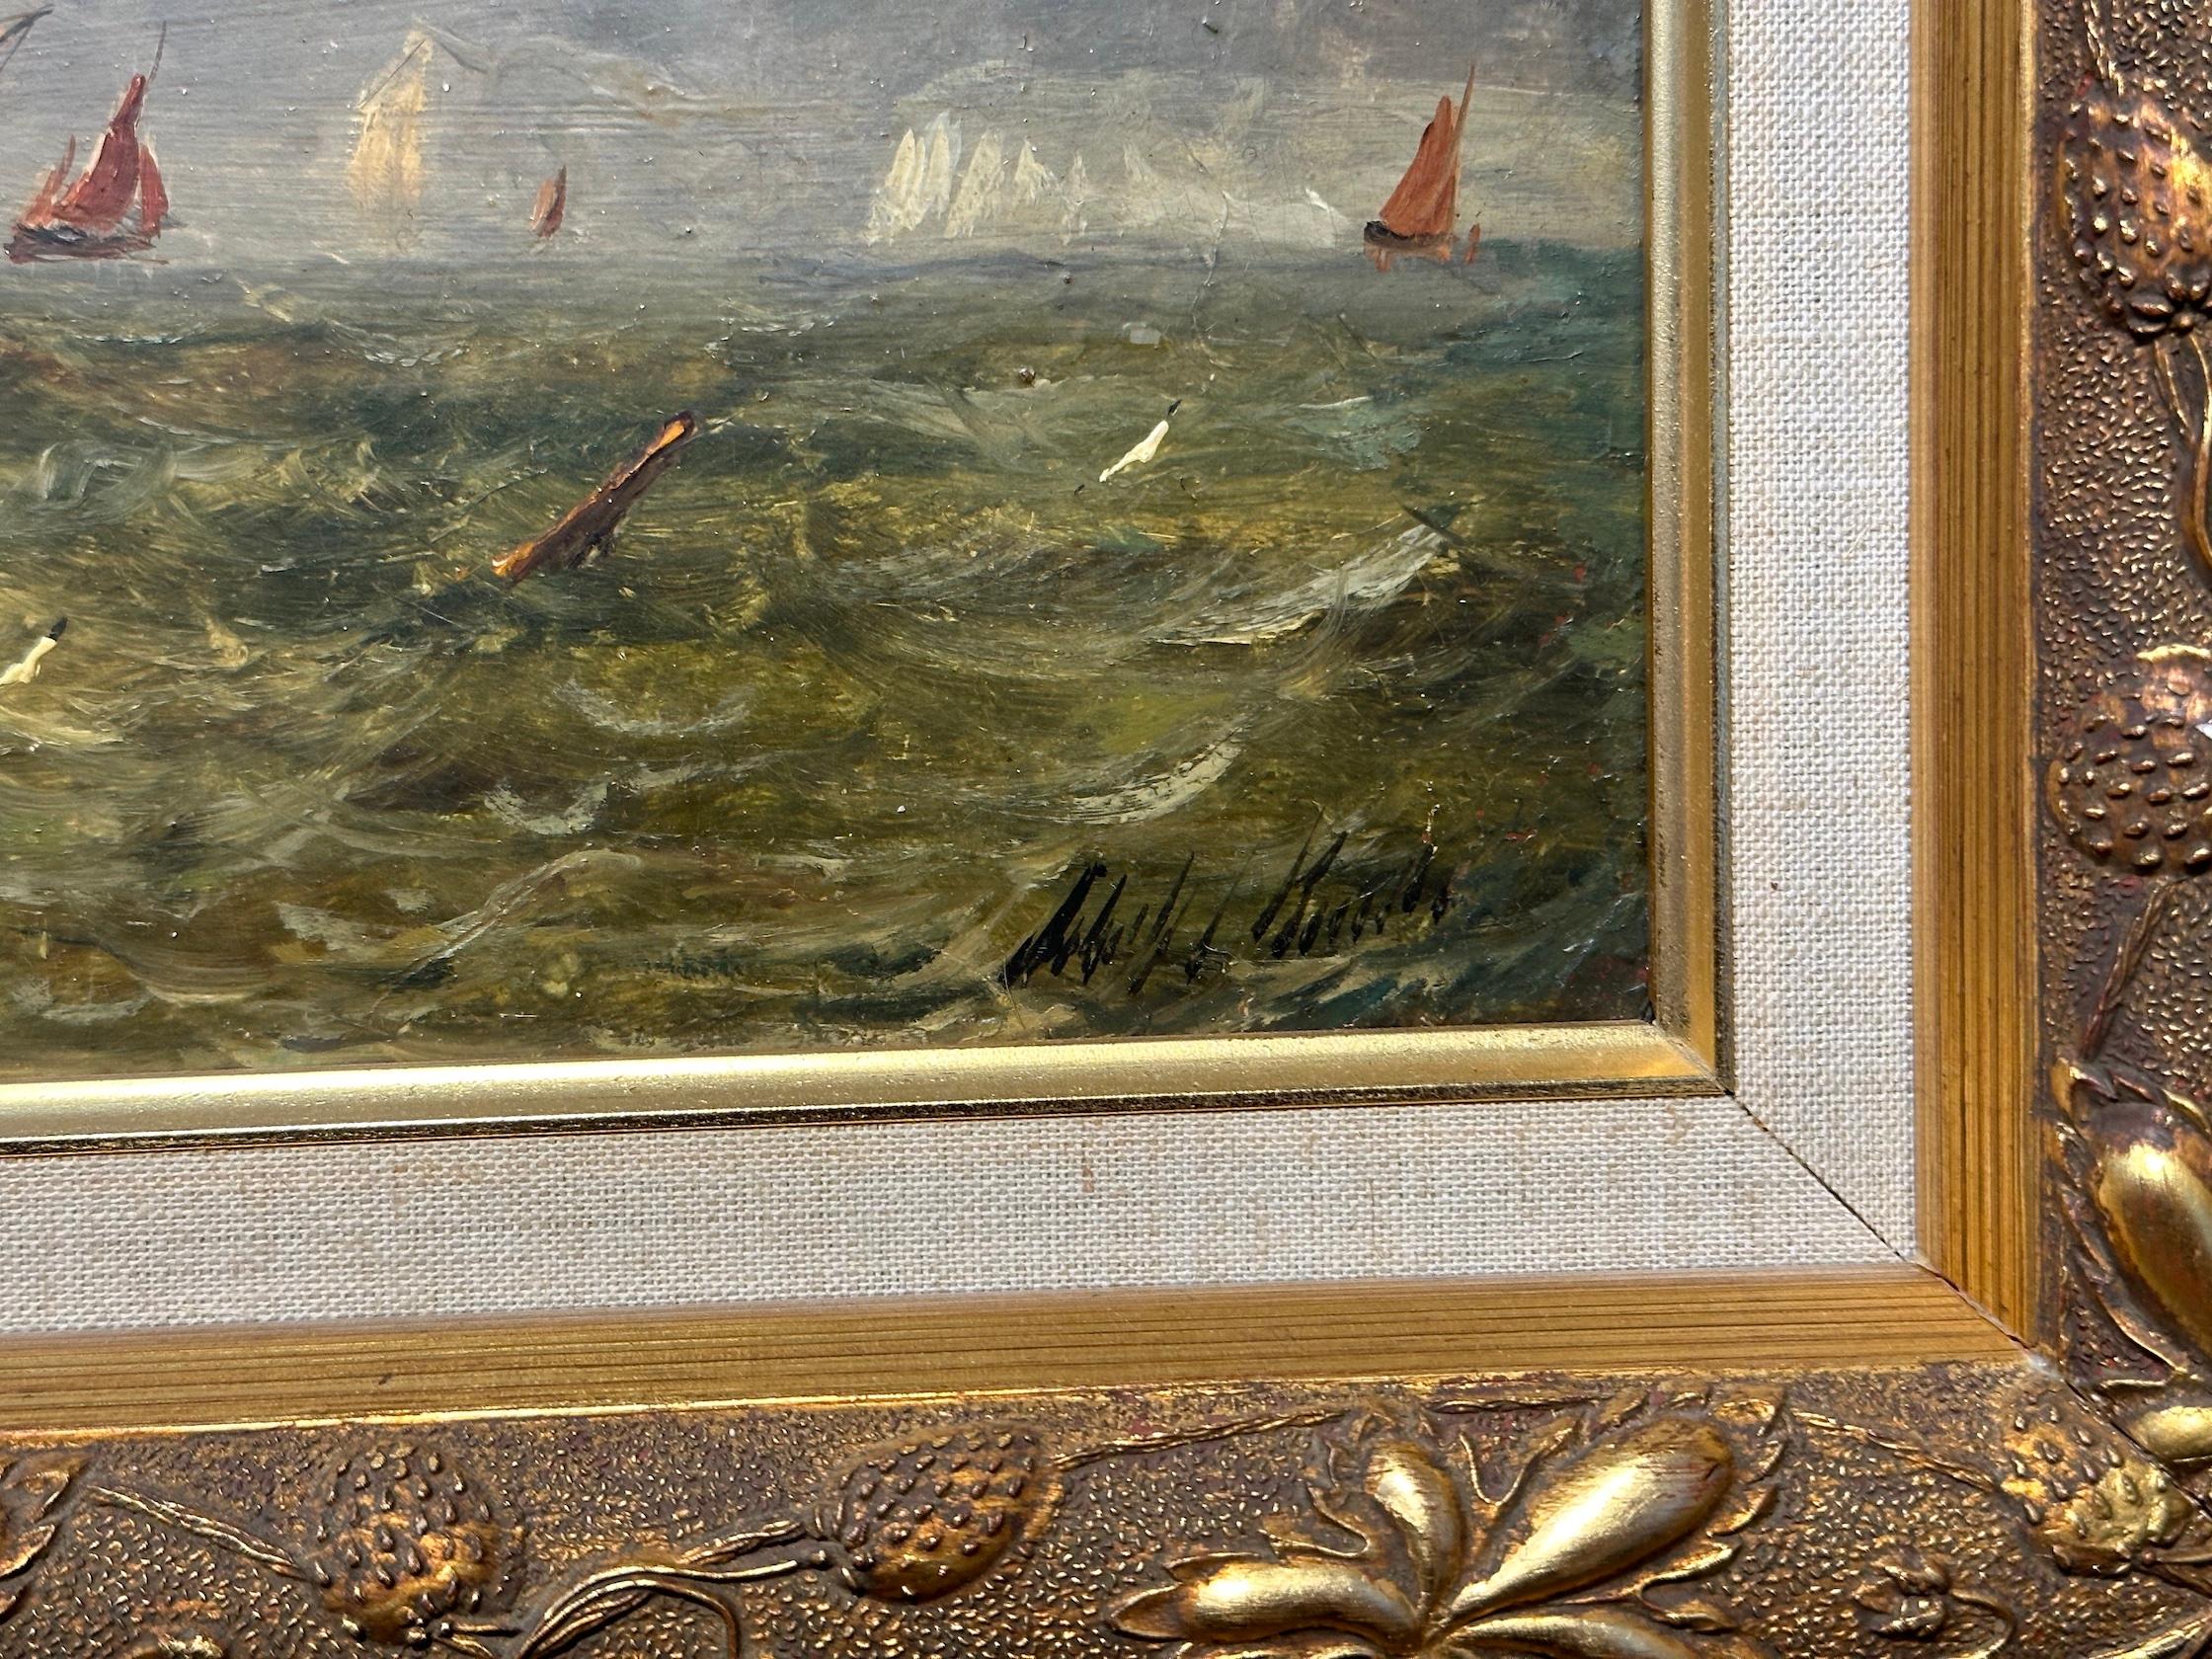 Antique Victorian, Impressionist 19th century English oil, Fishings boat at Sea.


Adolphus Knell was a superb painter of marine subjects during the middle of the 19th century. His work is collected all over the world and many are in important